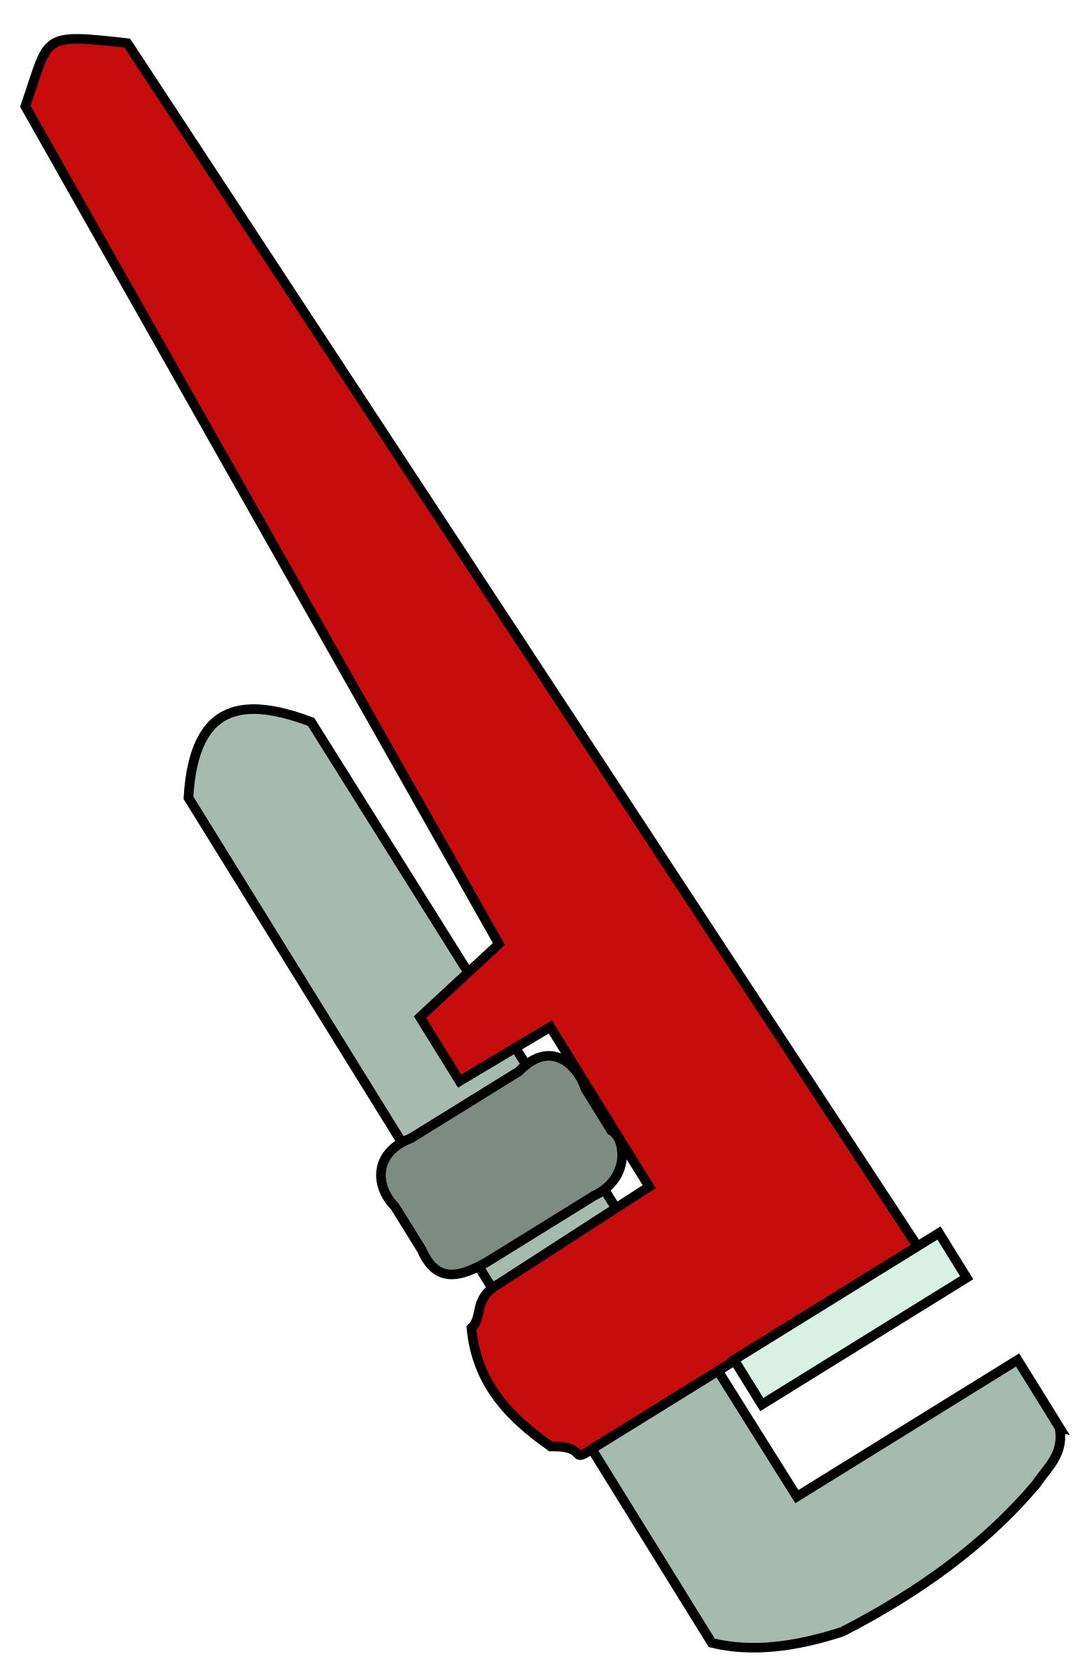 Pipe wrench png transparent